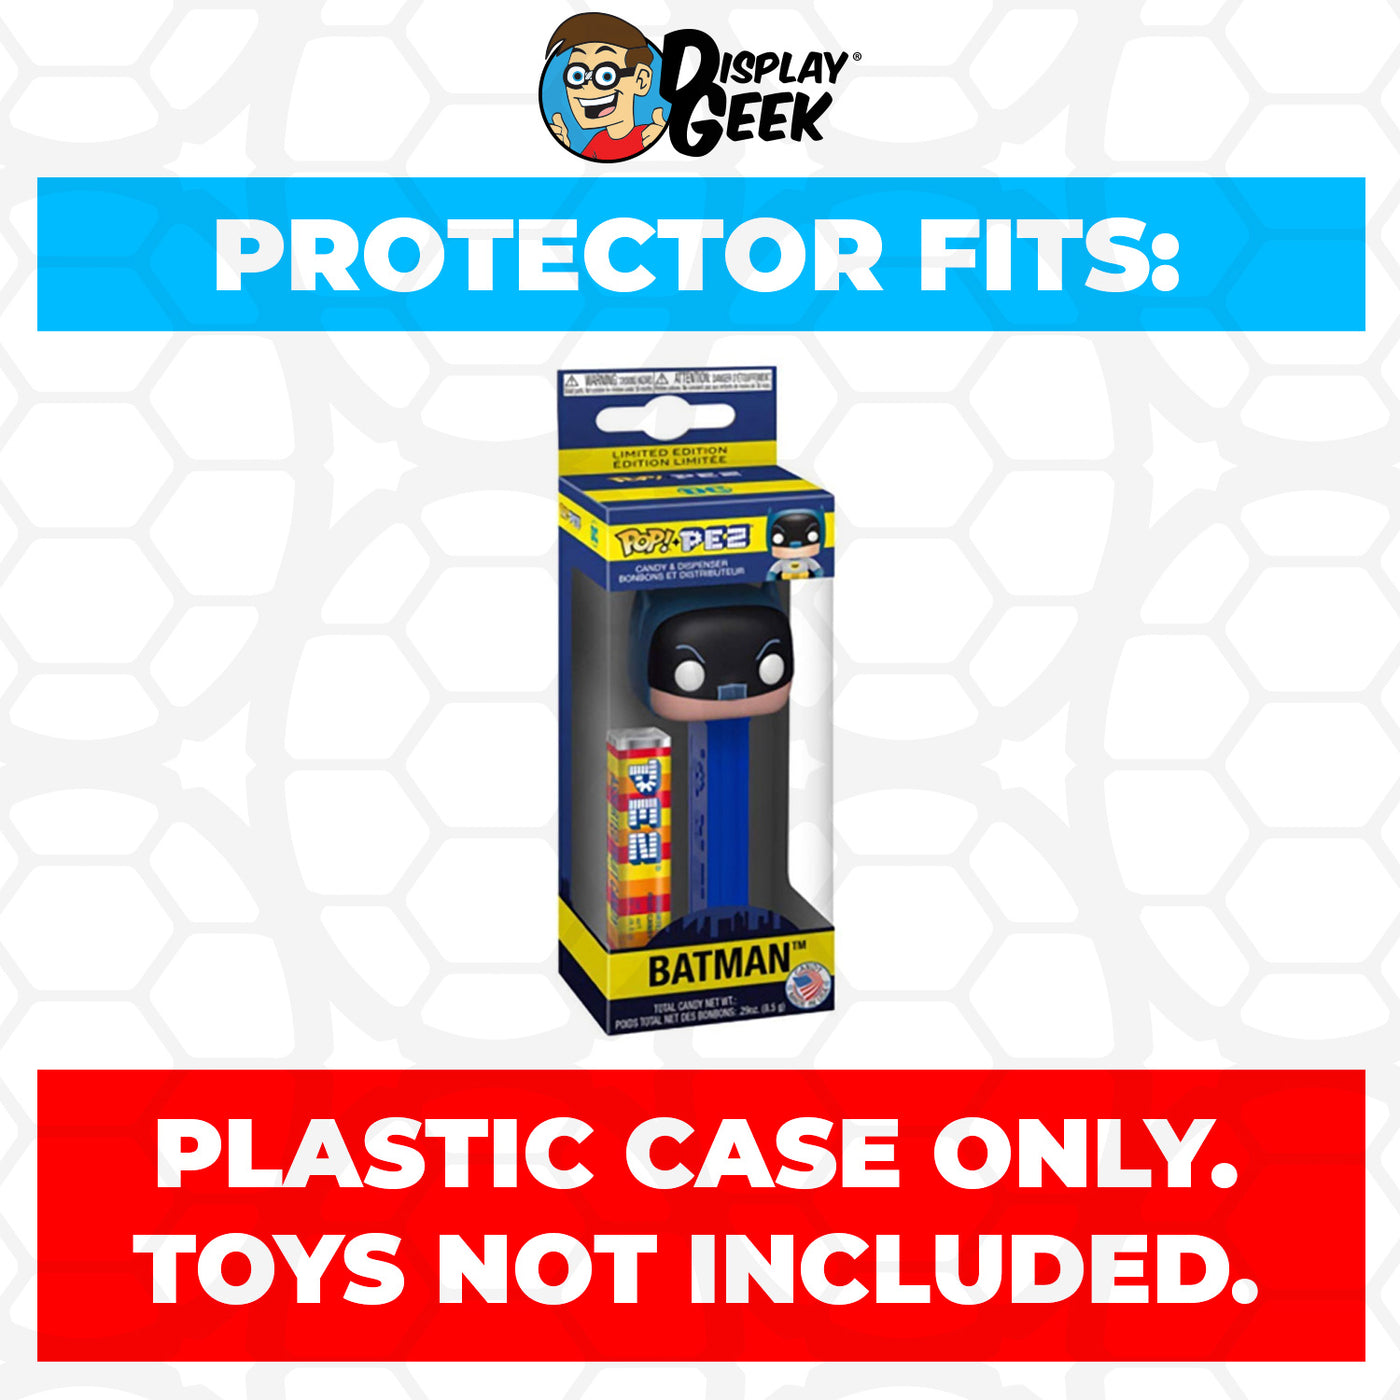 Pop Protector for Batman 1966 Blue Funko Pop Pez on The Protector Guide App by Display Geek